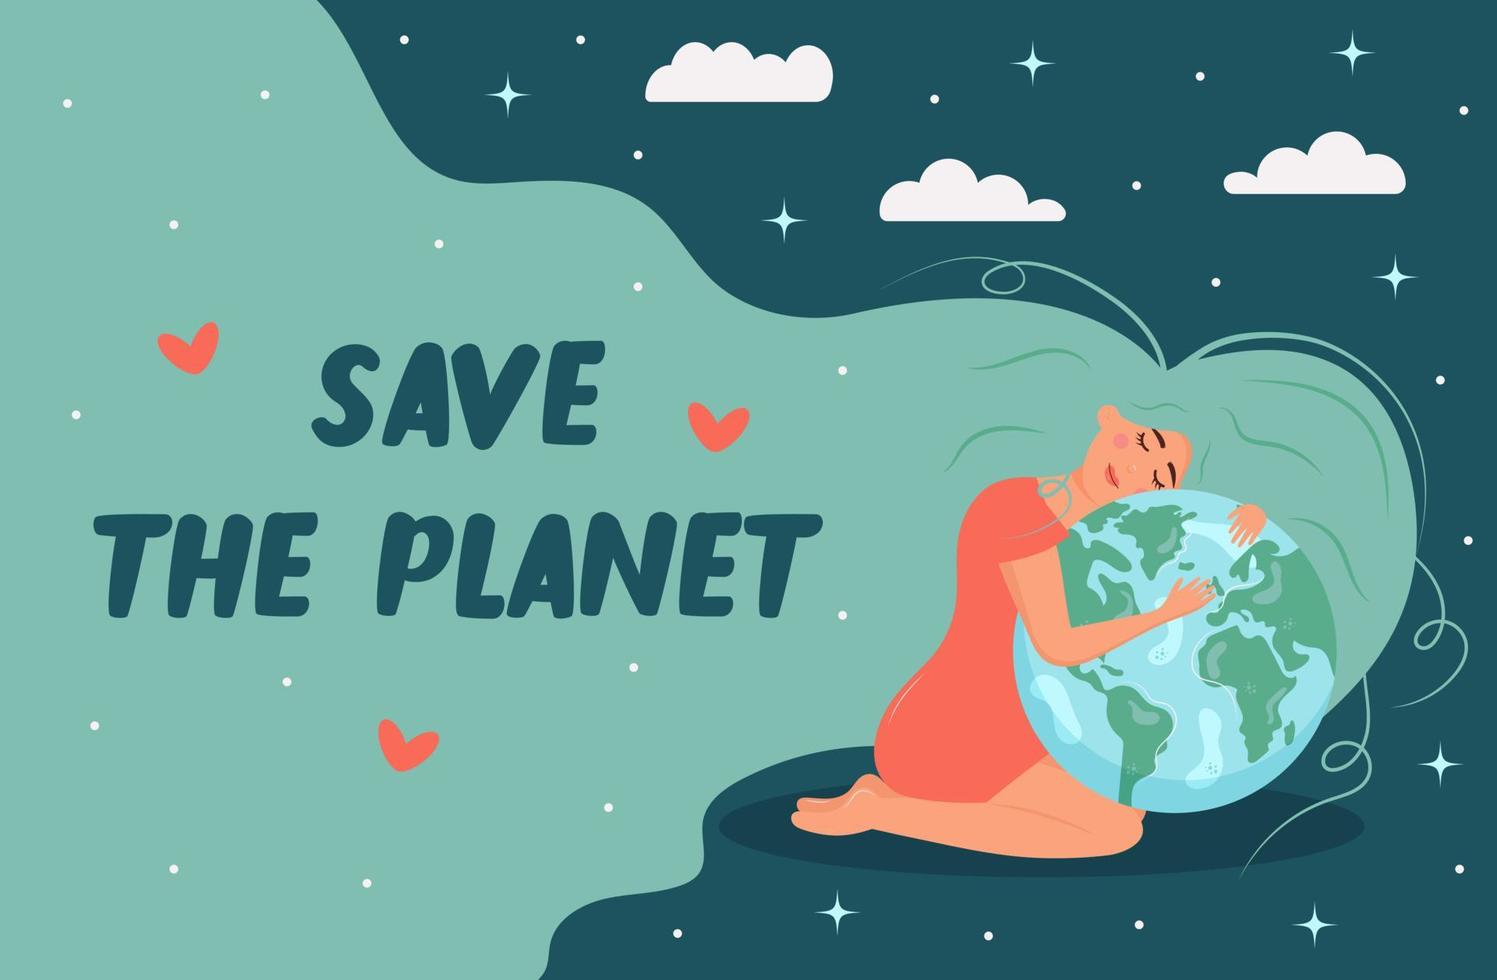 Girl hugging planet Earth. Save the planet lettering in her hair. Clouds and stars around. Environment conservation, energy saving, world peace, ecology support, Earth day  concept. vector